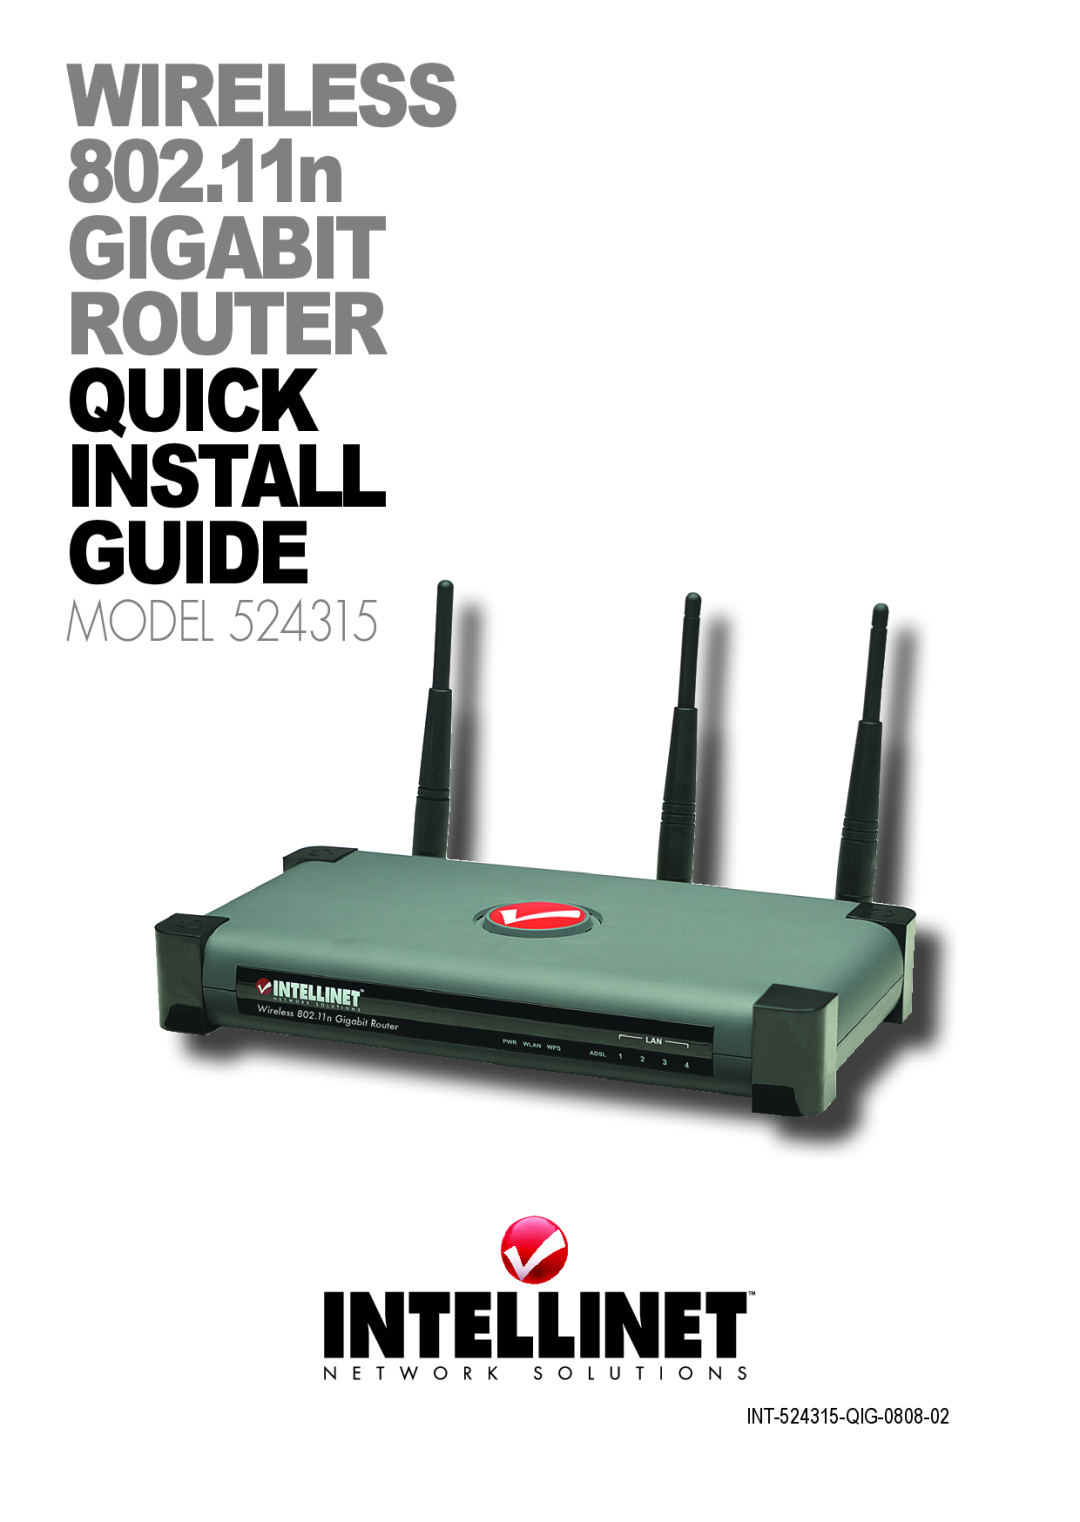 Intellinet Network Solutions 524315 manual Wireless 802.11n gigabit Router quick install guide, Model 